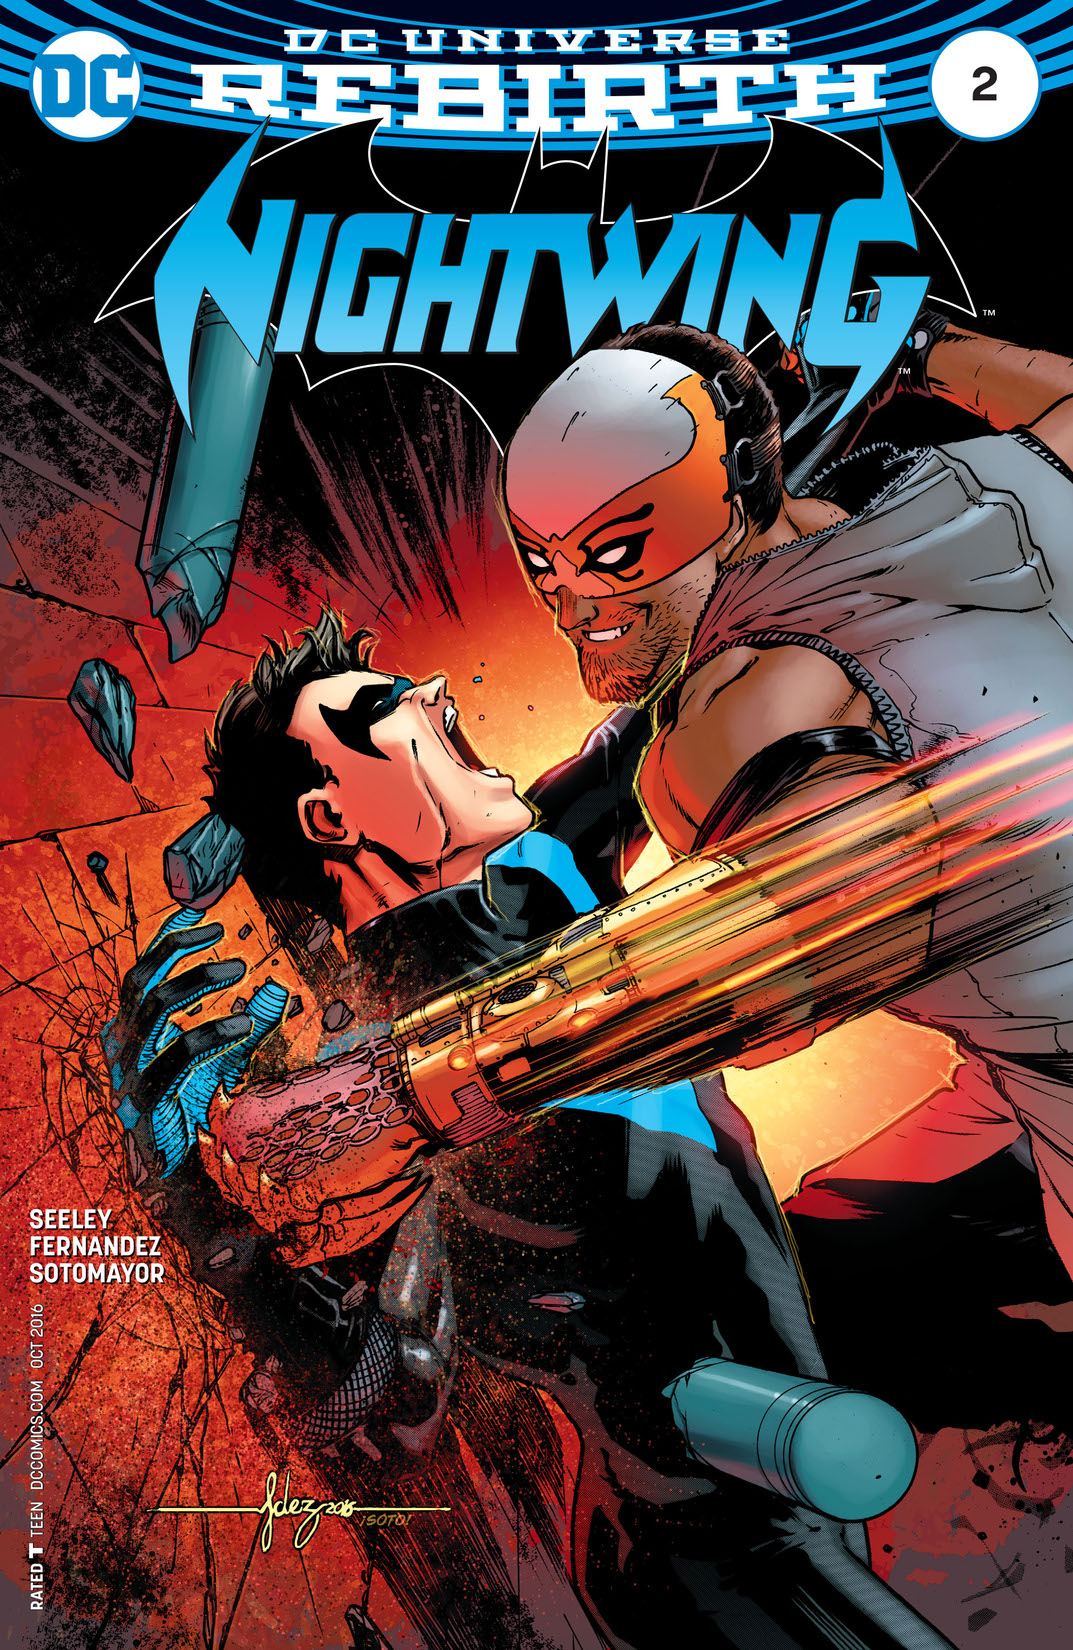 Nightwing (2016-) #2 preview images